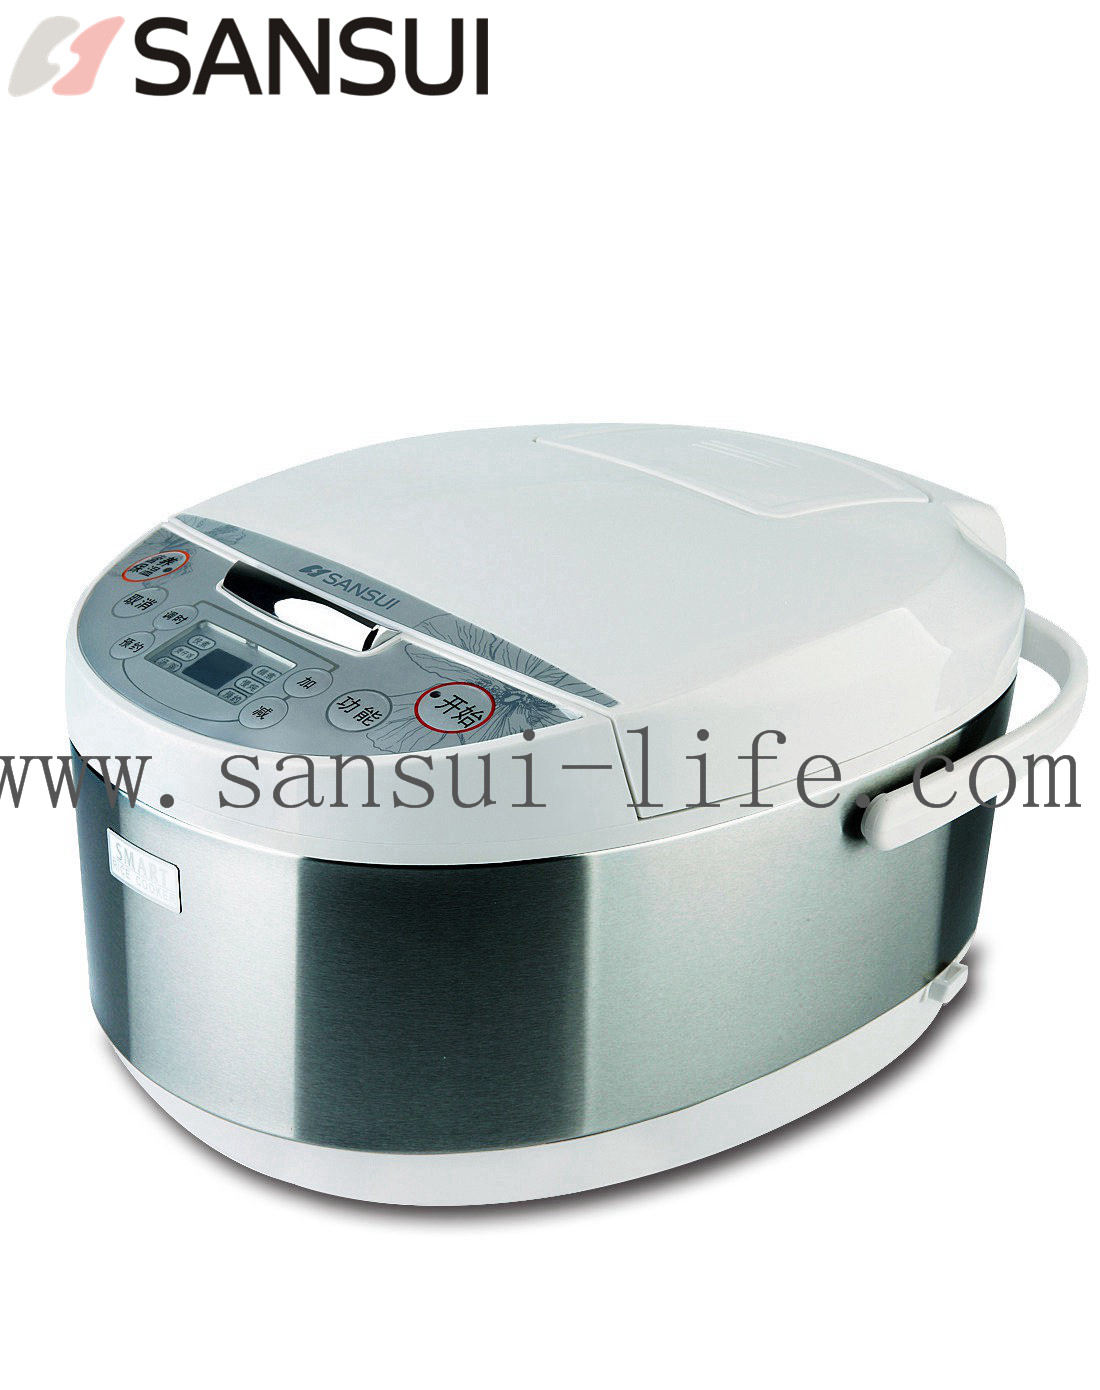 SANSUI CFXB40-70L Intelligent, Grey&Pink color to choose, square rice cooker, with 3C certification